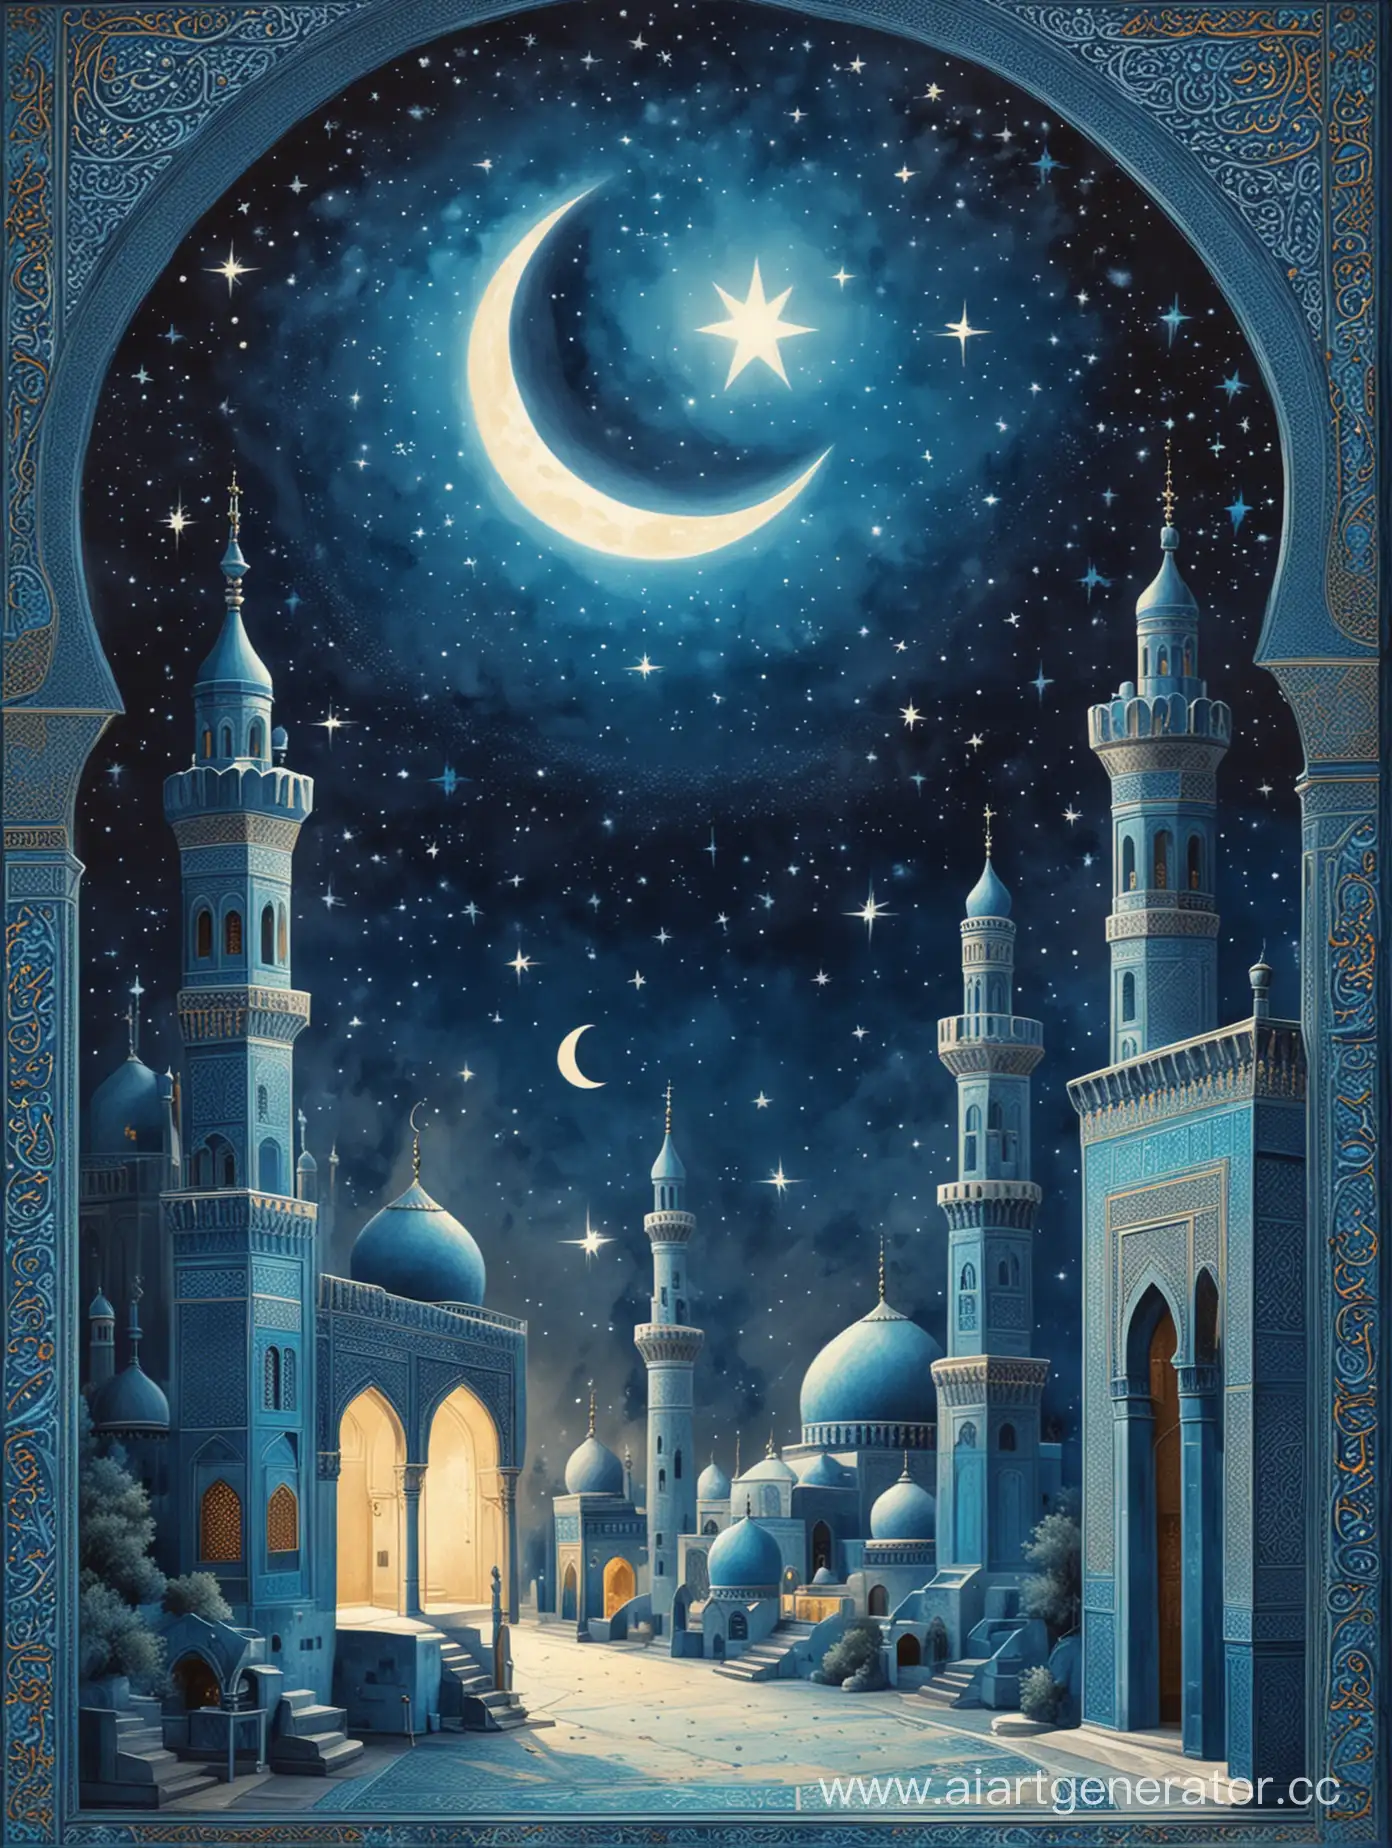 Ramadan scene with a crescent moon, minaret, mihrab, and stars, all depicted in shades of blue